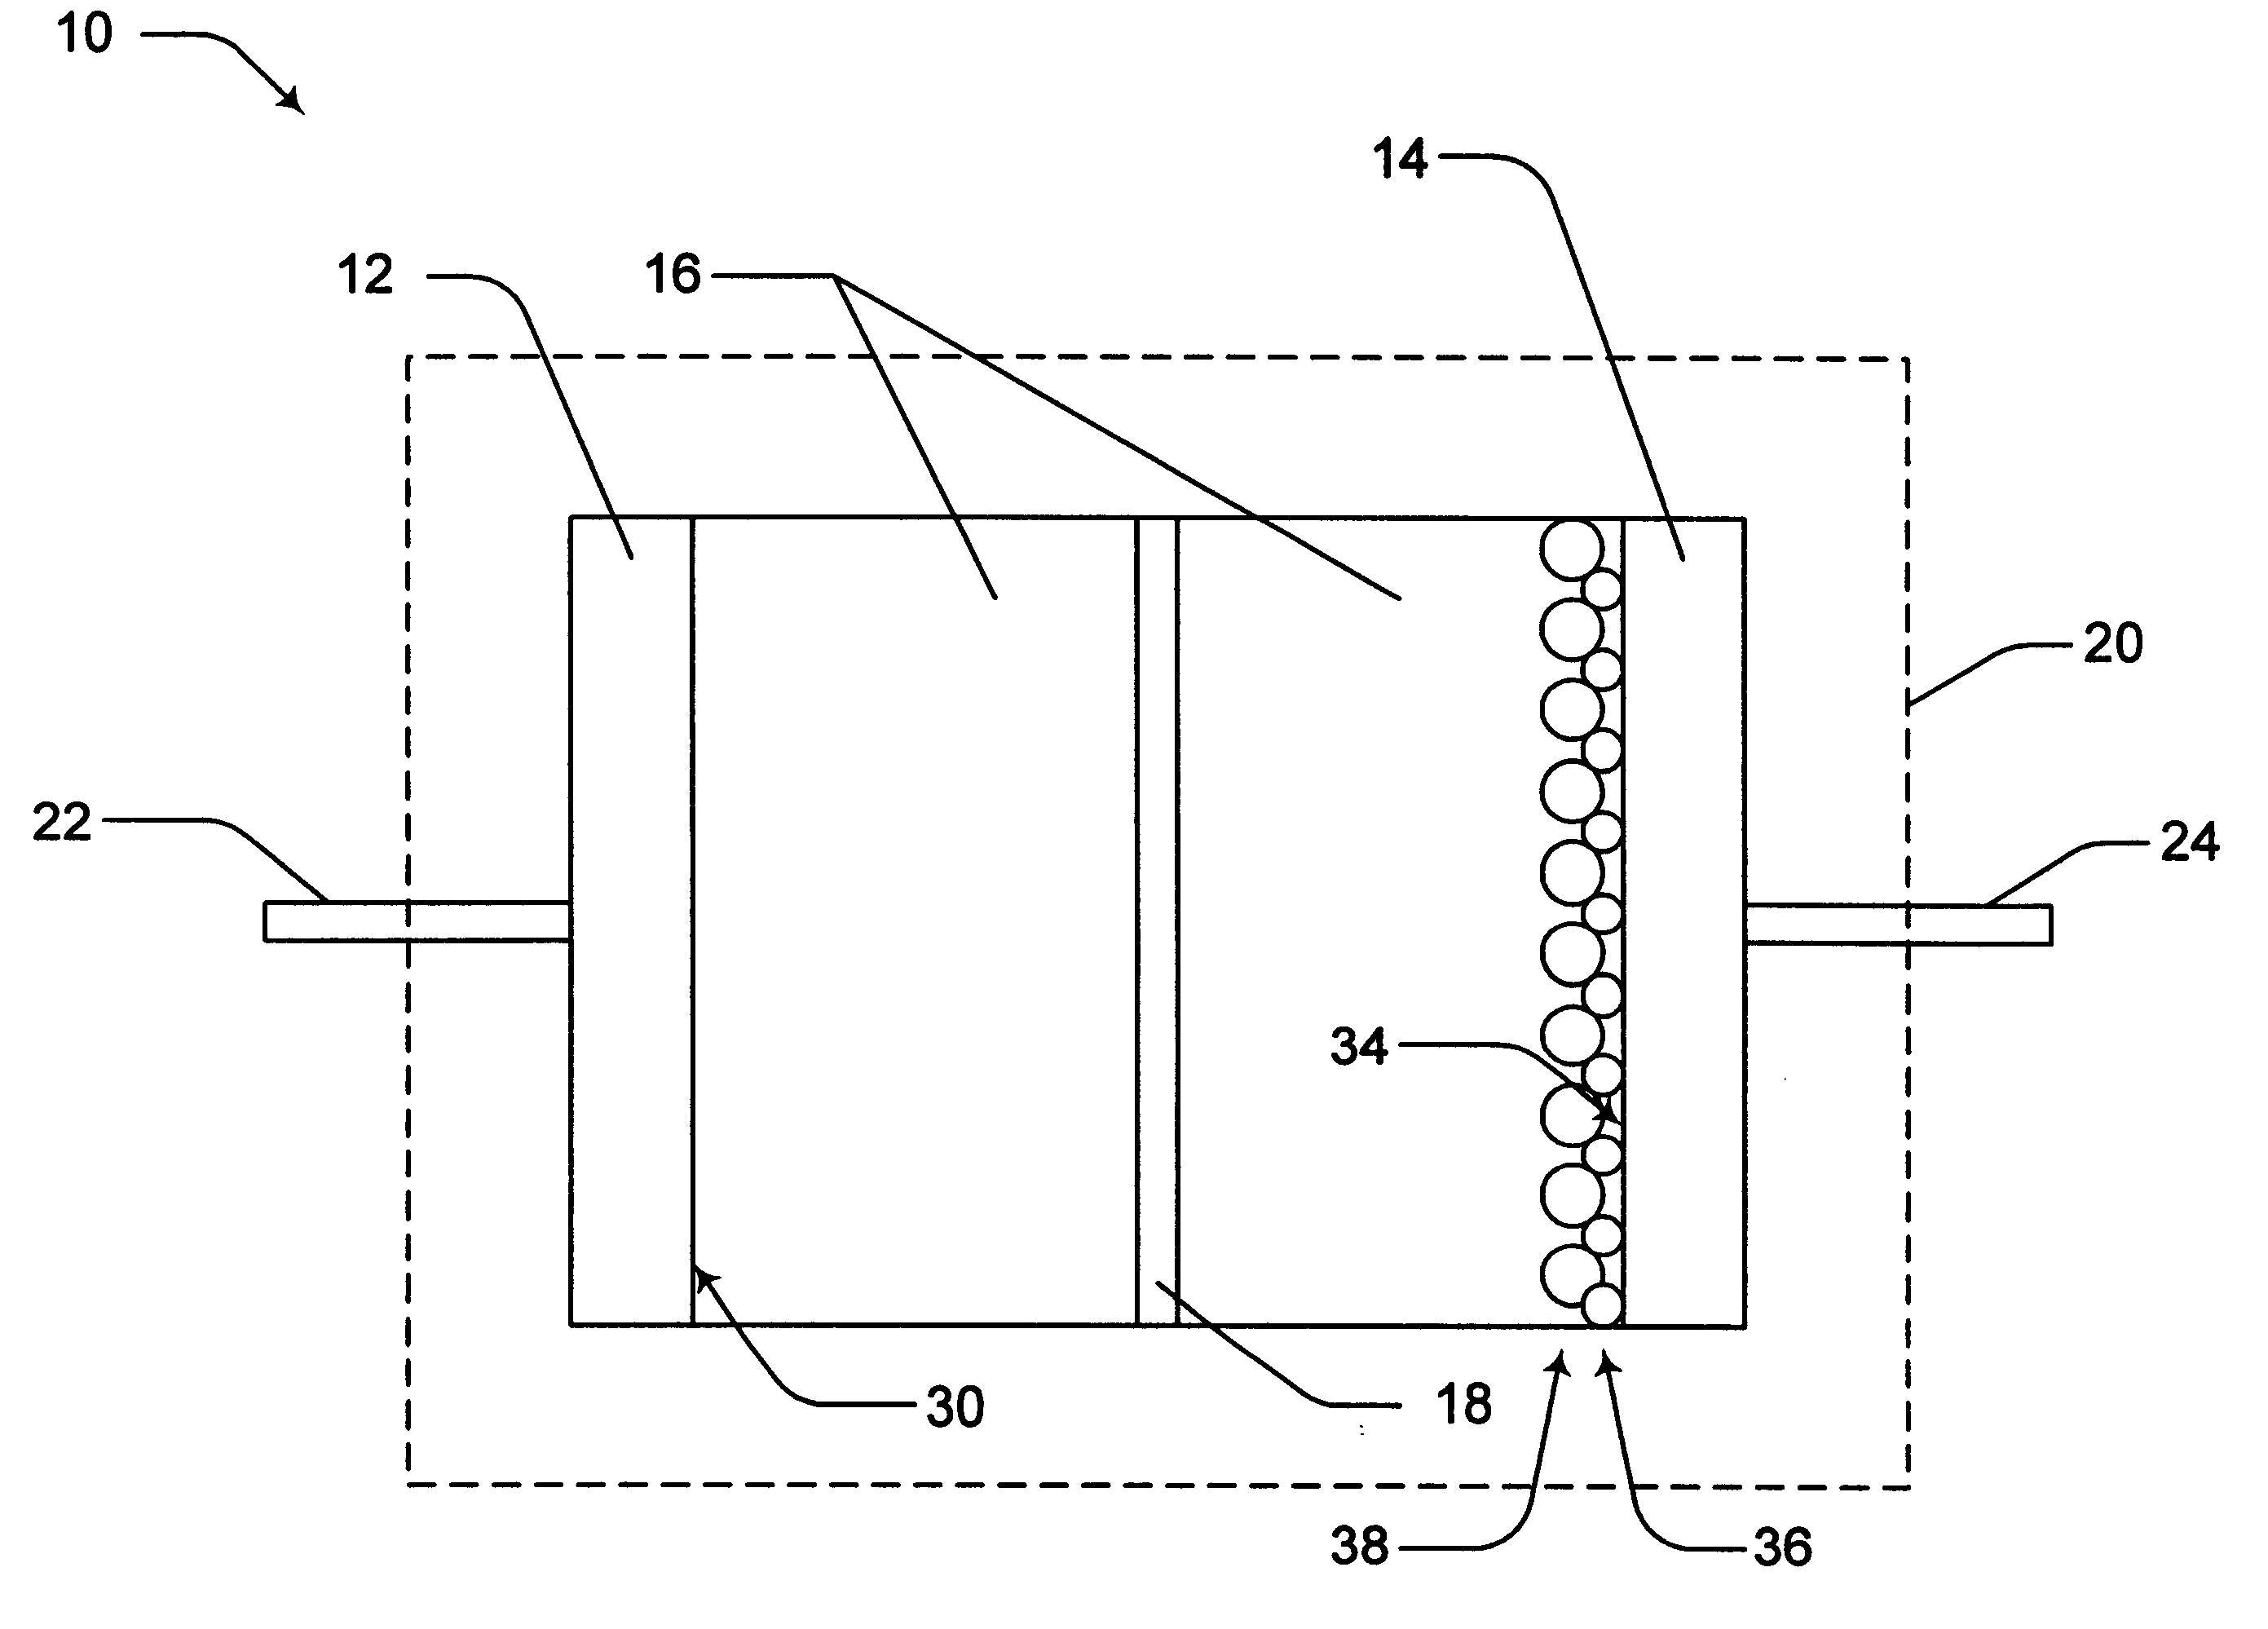 Asymmetric electrochemical capacitor and method of making